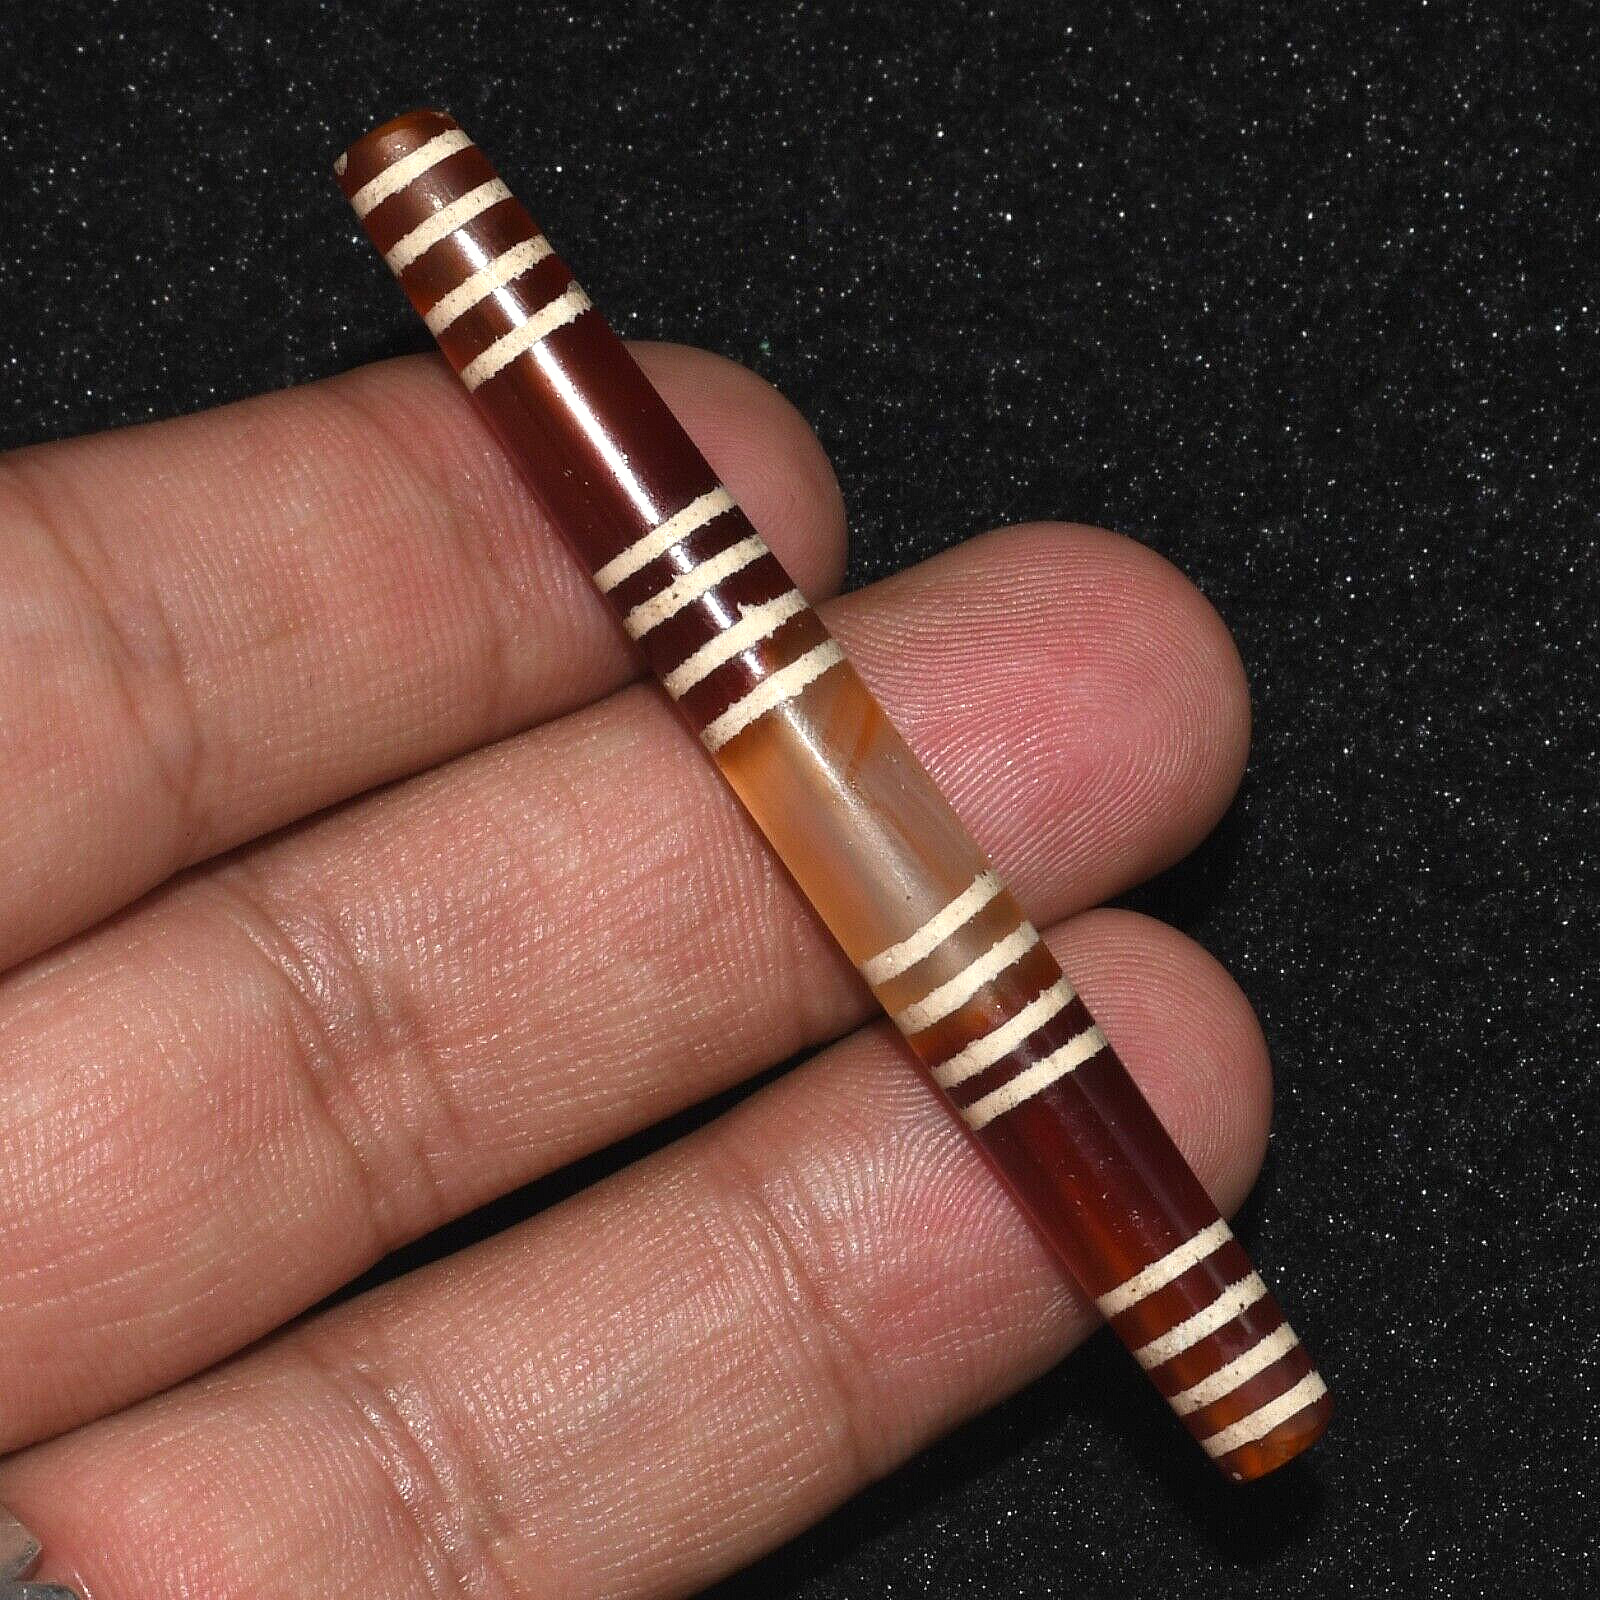 Large Ancient South East Asian Burmese Pyu Culture Carnelian Bead with Stripes